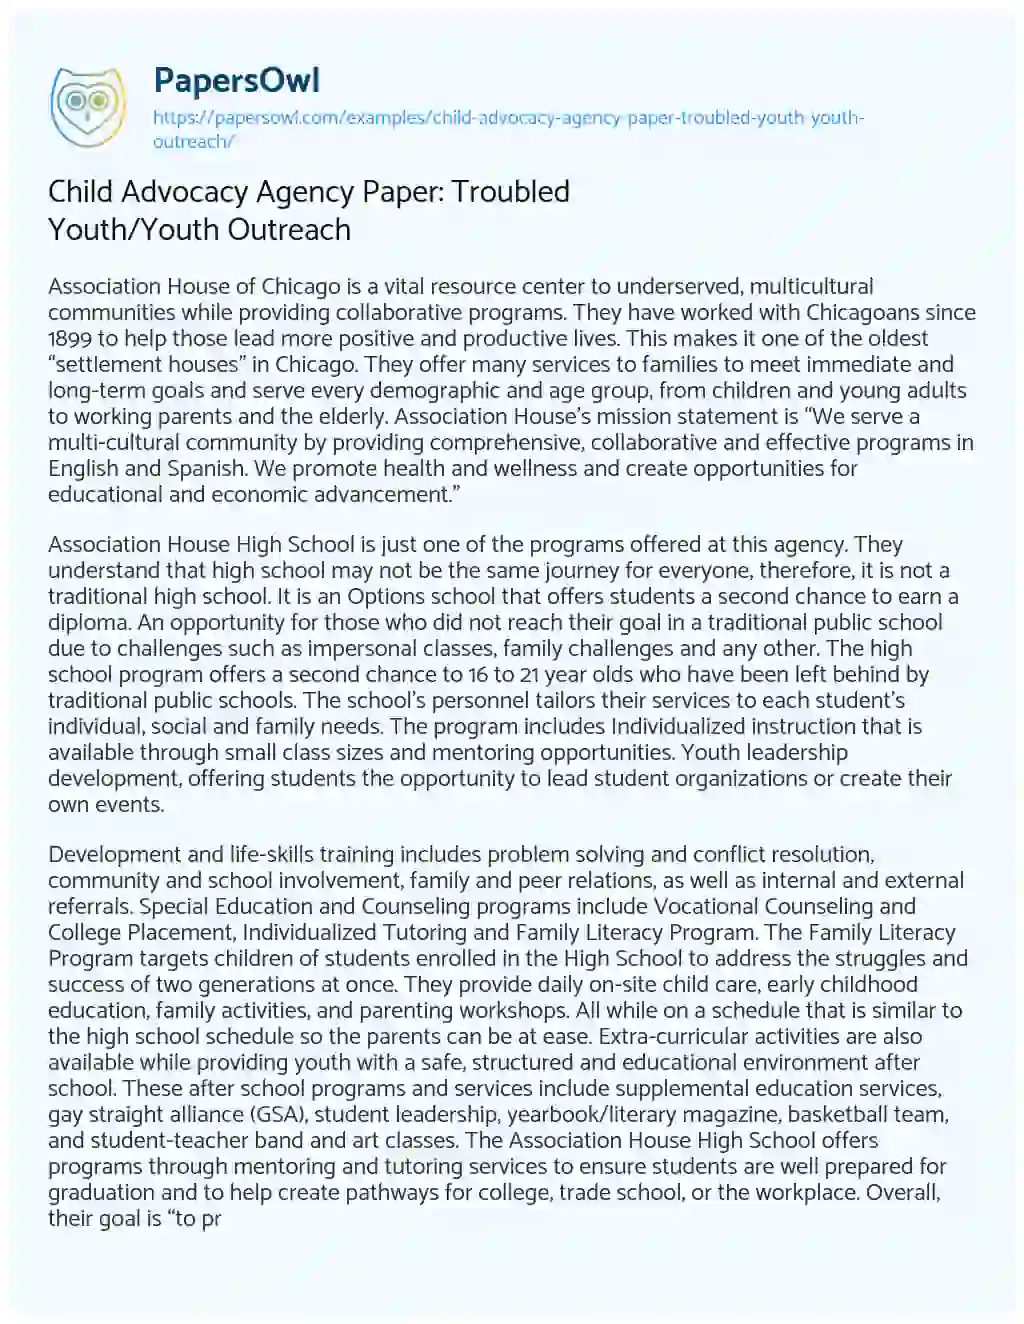 Essay on Child Advocacy Agency Paper: Troubled Youth/Youth Outreach